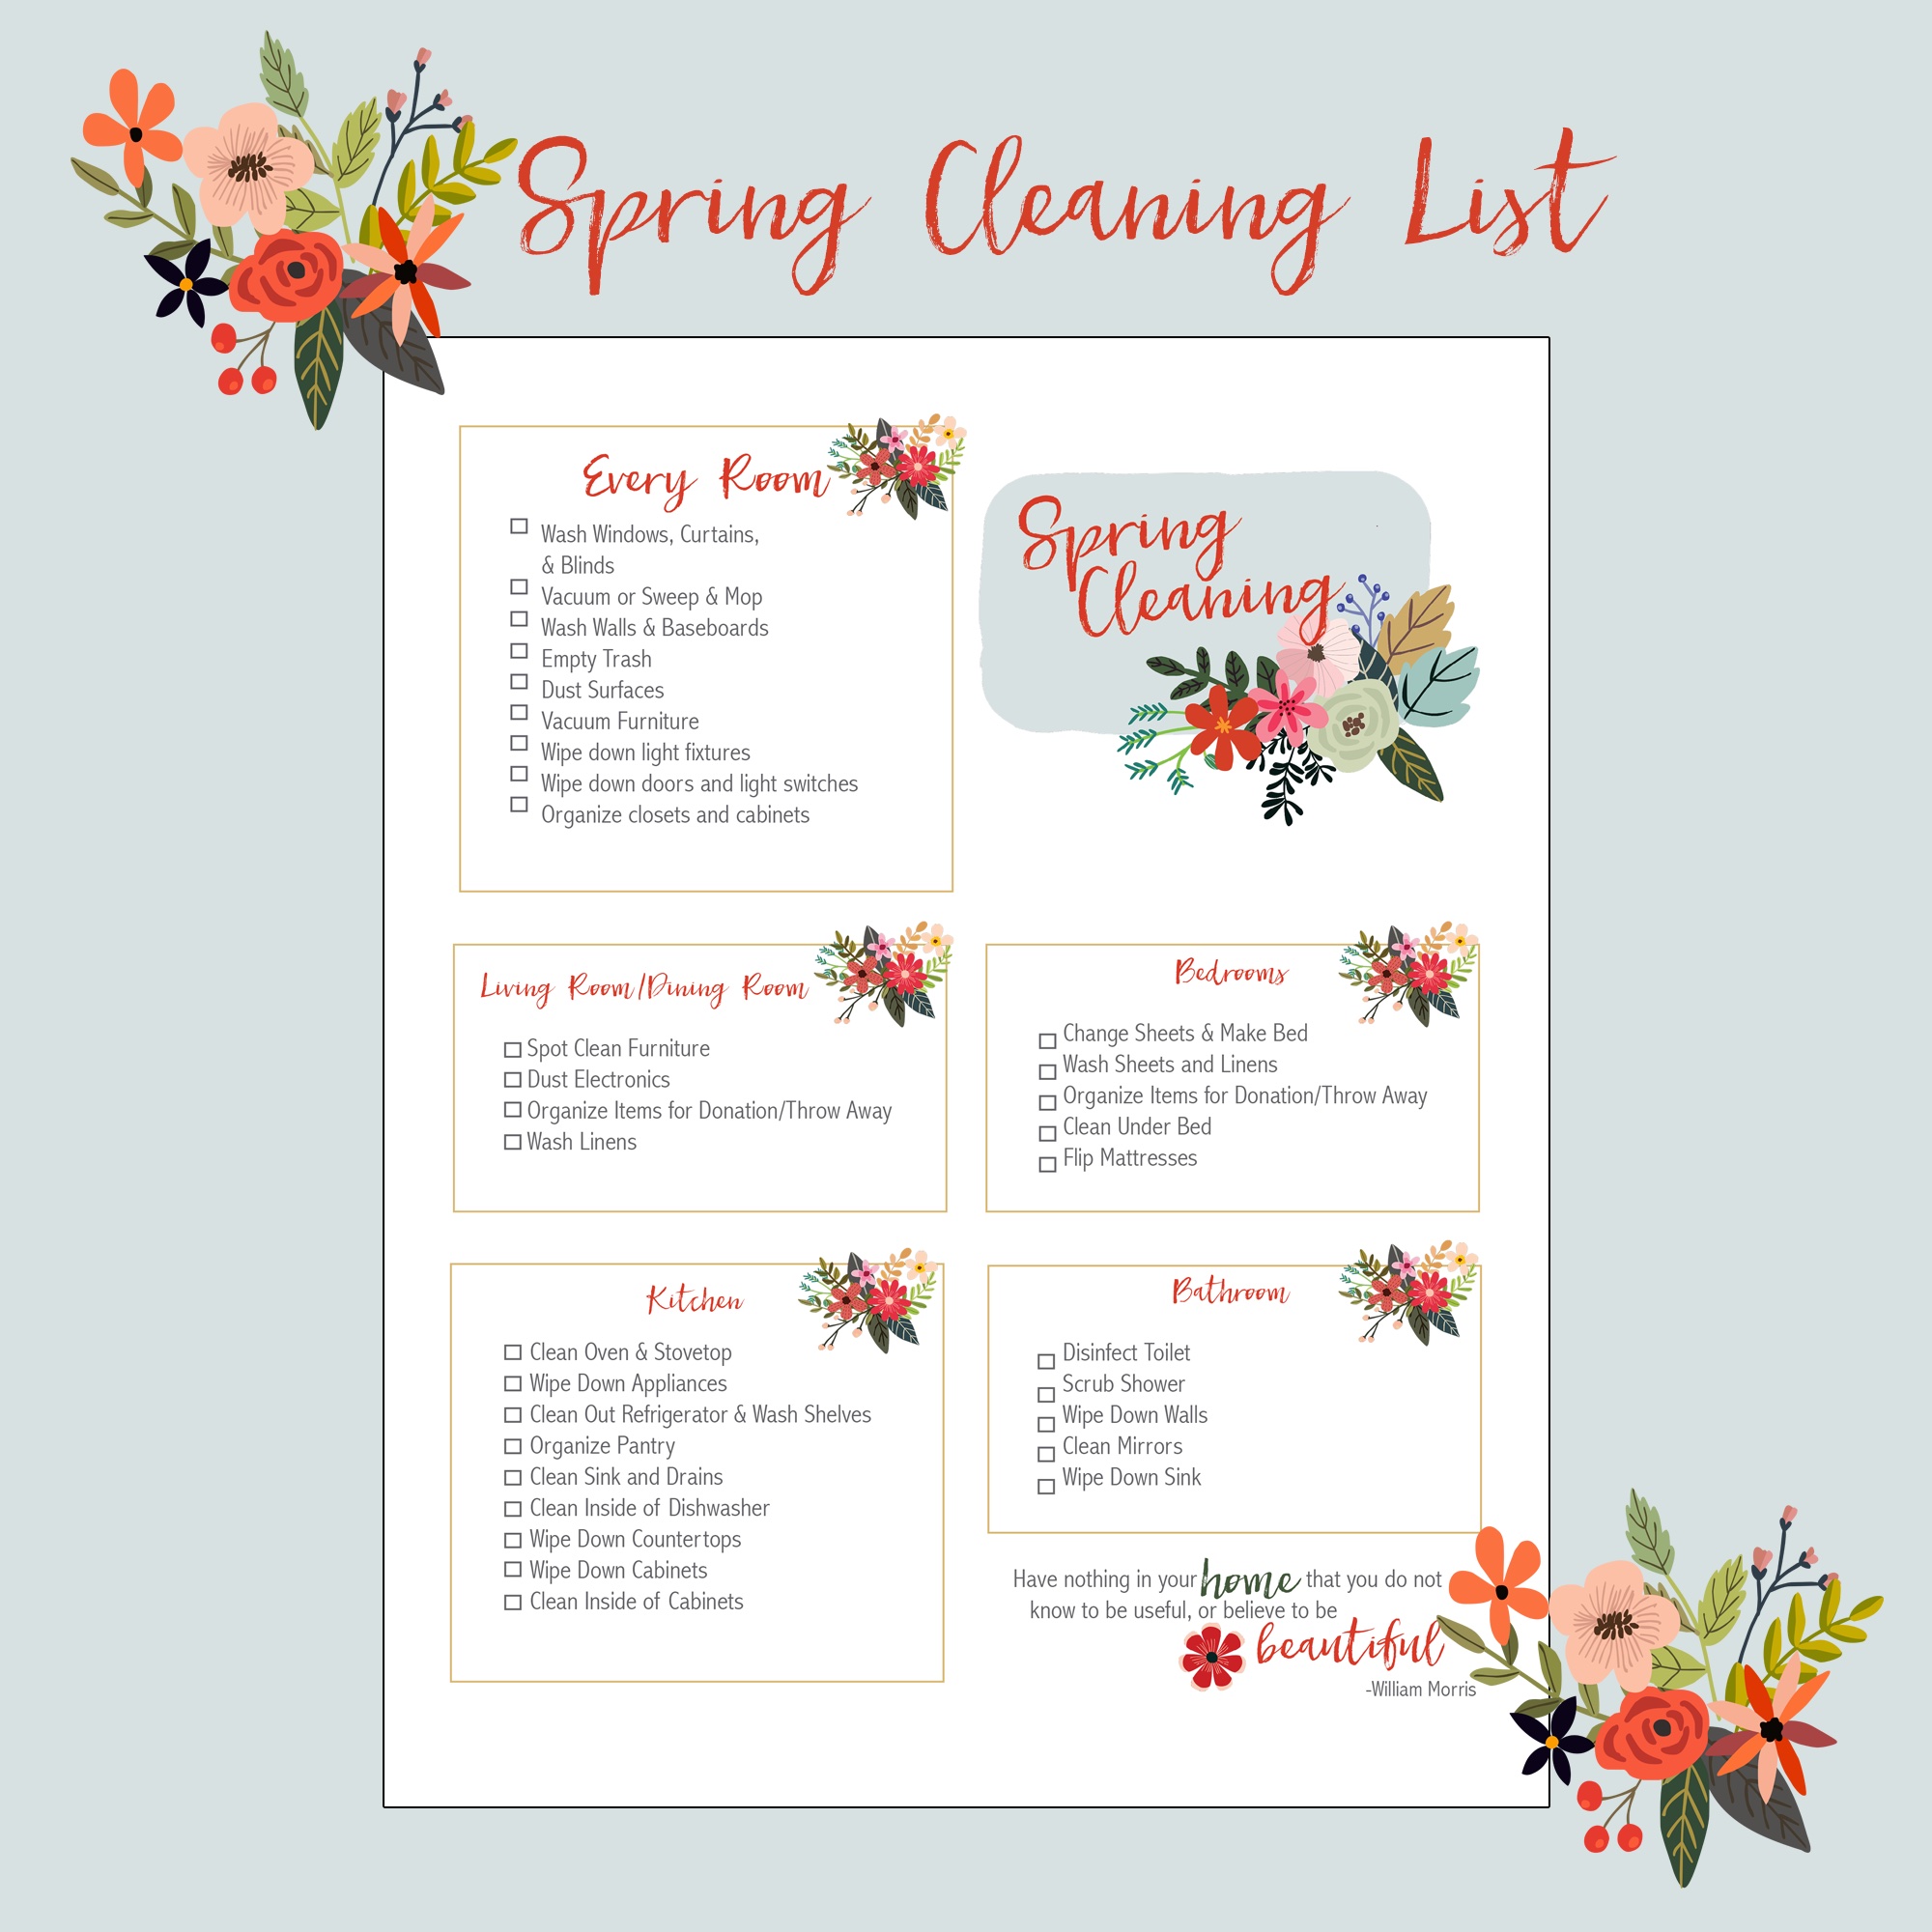 https://diycandy.b-cdn.net/wp-content/uploads/2020/03/Spring-Cleaning-Checklist-with-a-Free-Pretty-Printable.jpg